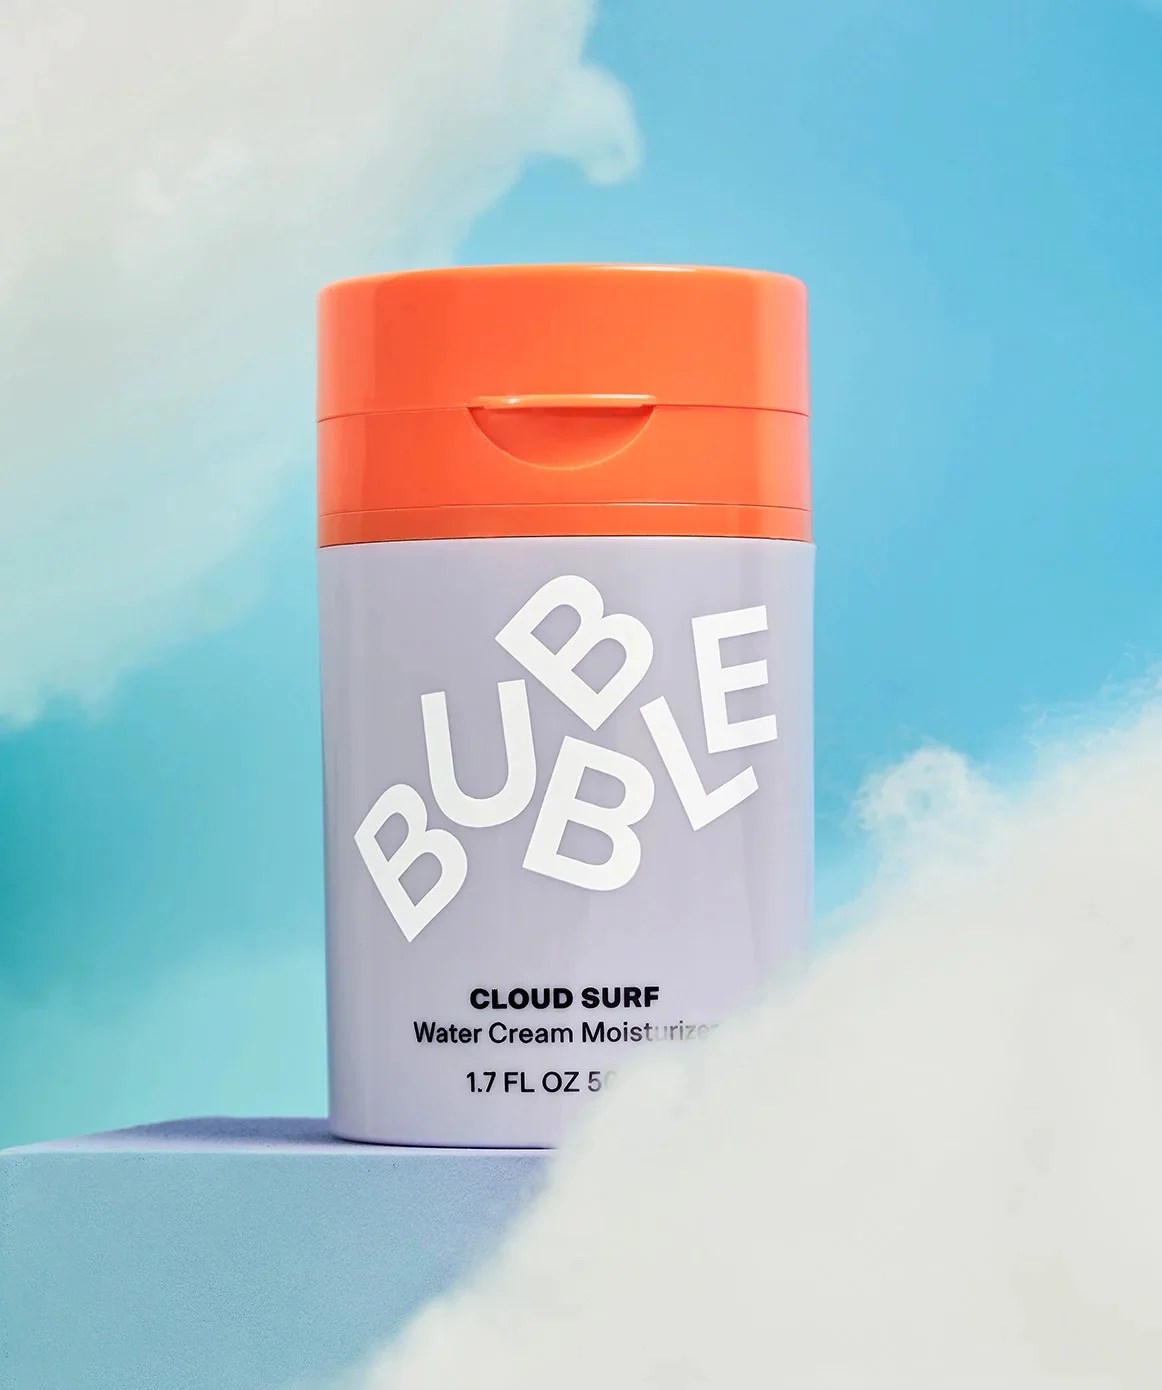  Bubble Skincare Deep Dive Alpha Hydroxy Acid + PHA Exfoliating  Mask - Willow Bark Extract + Azelaic Acid - Gentle, Exfoliating Face Mask  to Support Oil Reduction and Even Skin